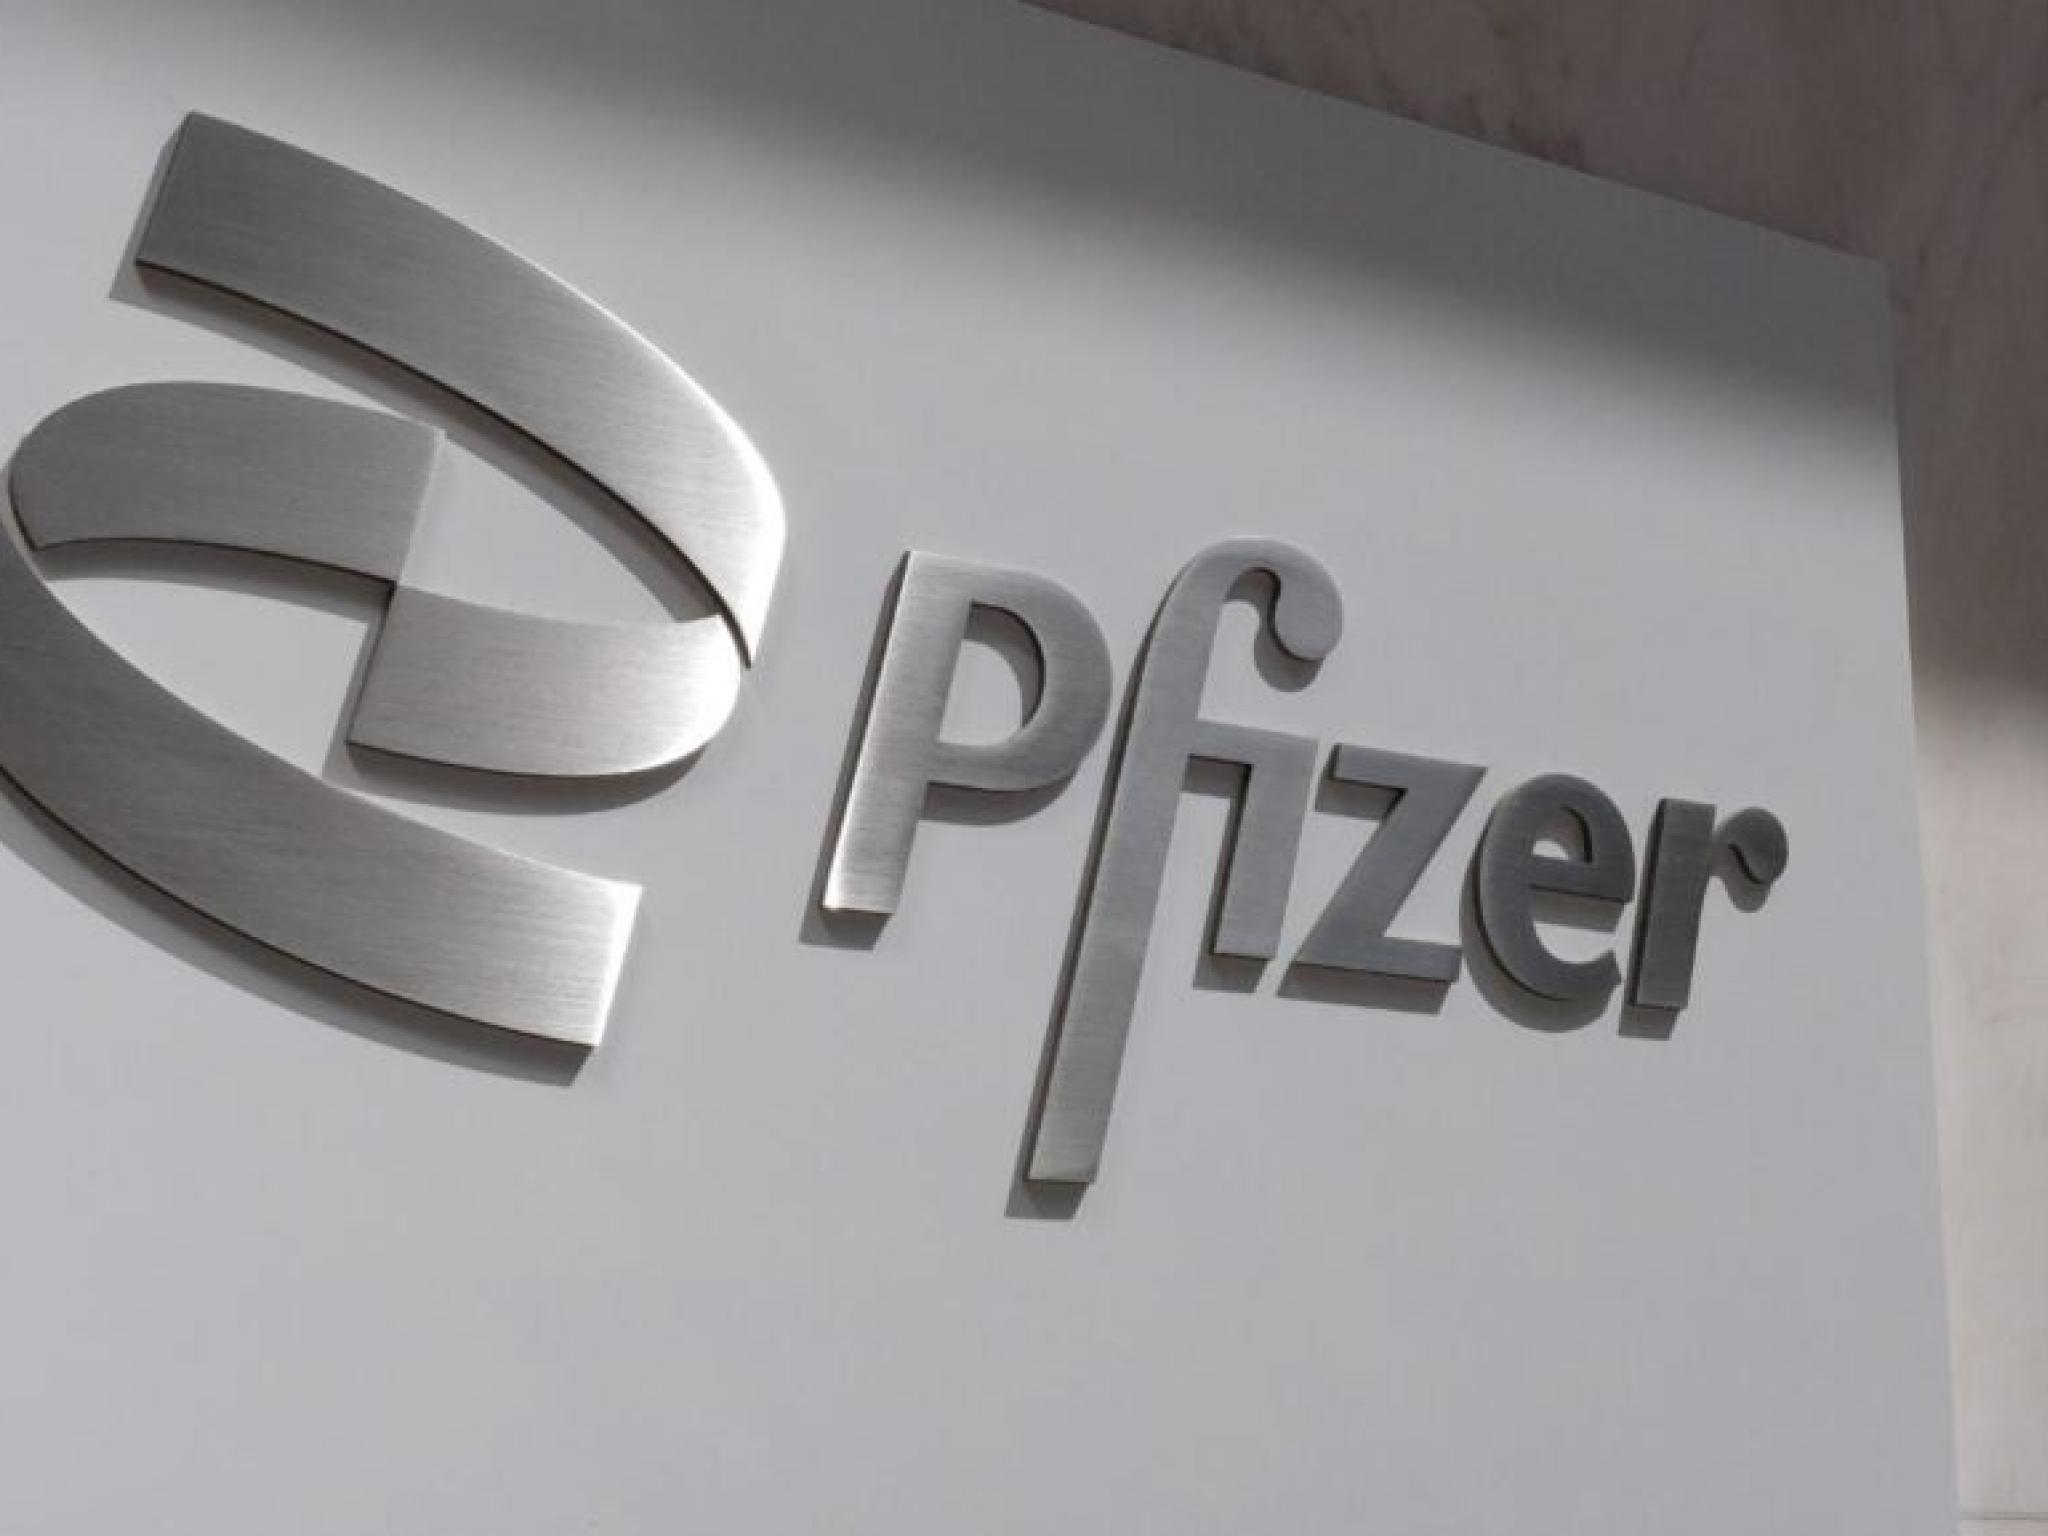  second-death---pfizer-reports-young-boys-death-after-one-year-of-gene-therapy-treatment-in-muscle-wasting-disorder-trial 